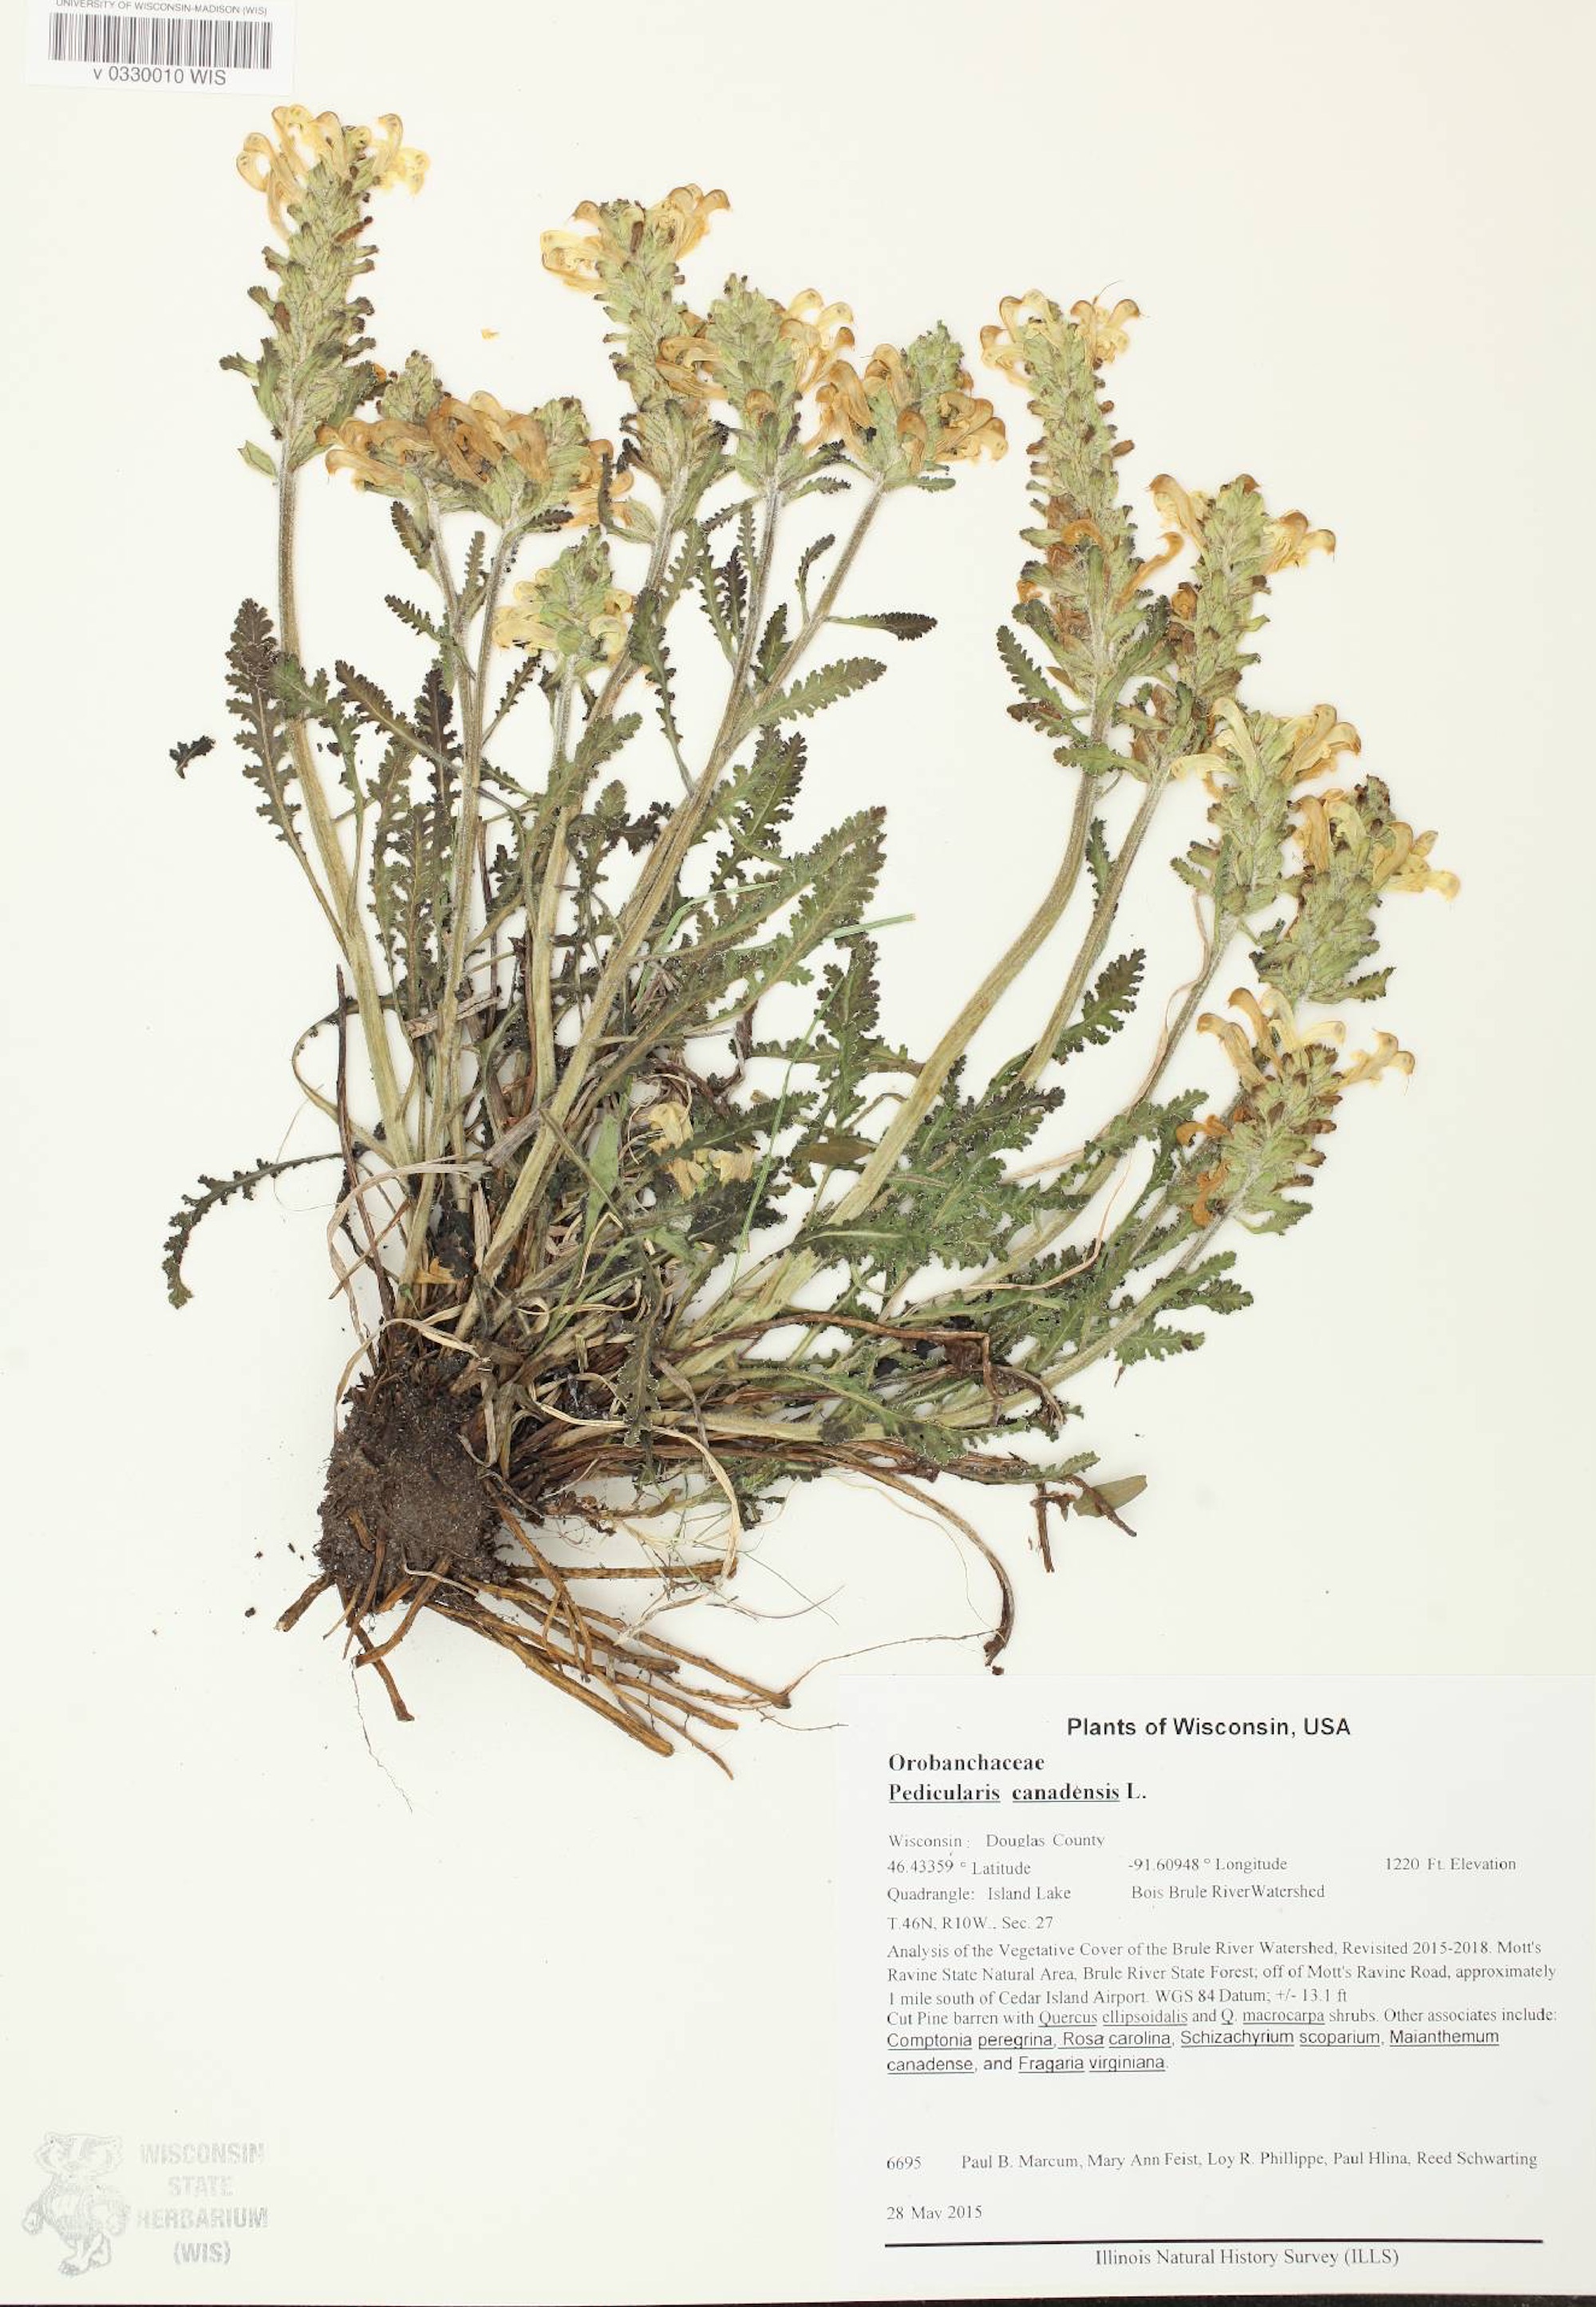 Canadian Lousewort (Pedicularis canadensis) specimen collected on May 28, 2015 in Douglas County one mile south of Cedar Island Airport.